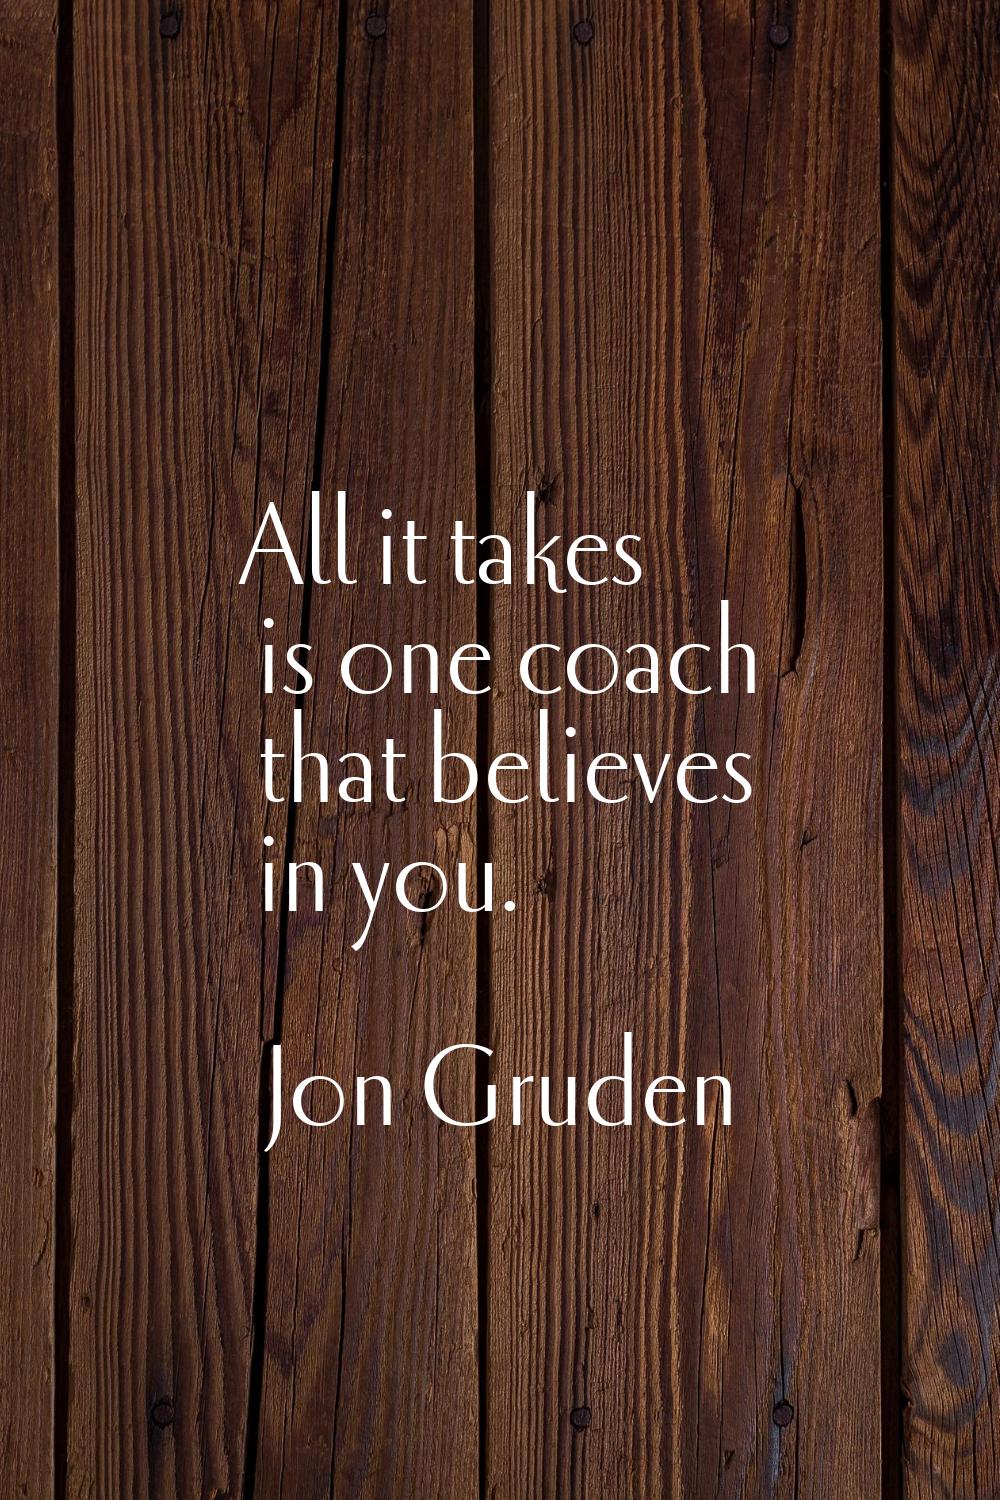 All it takes is one coach that believes in you.